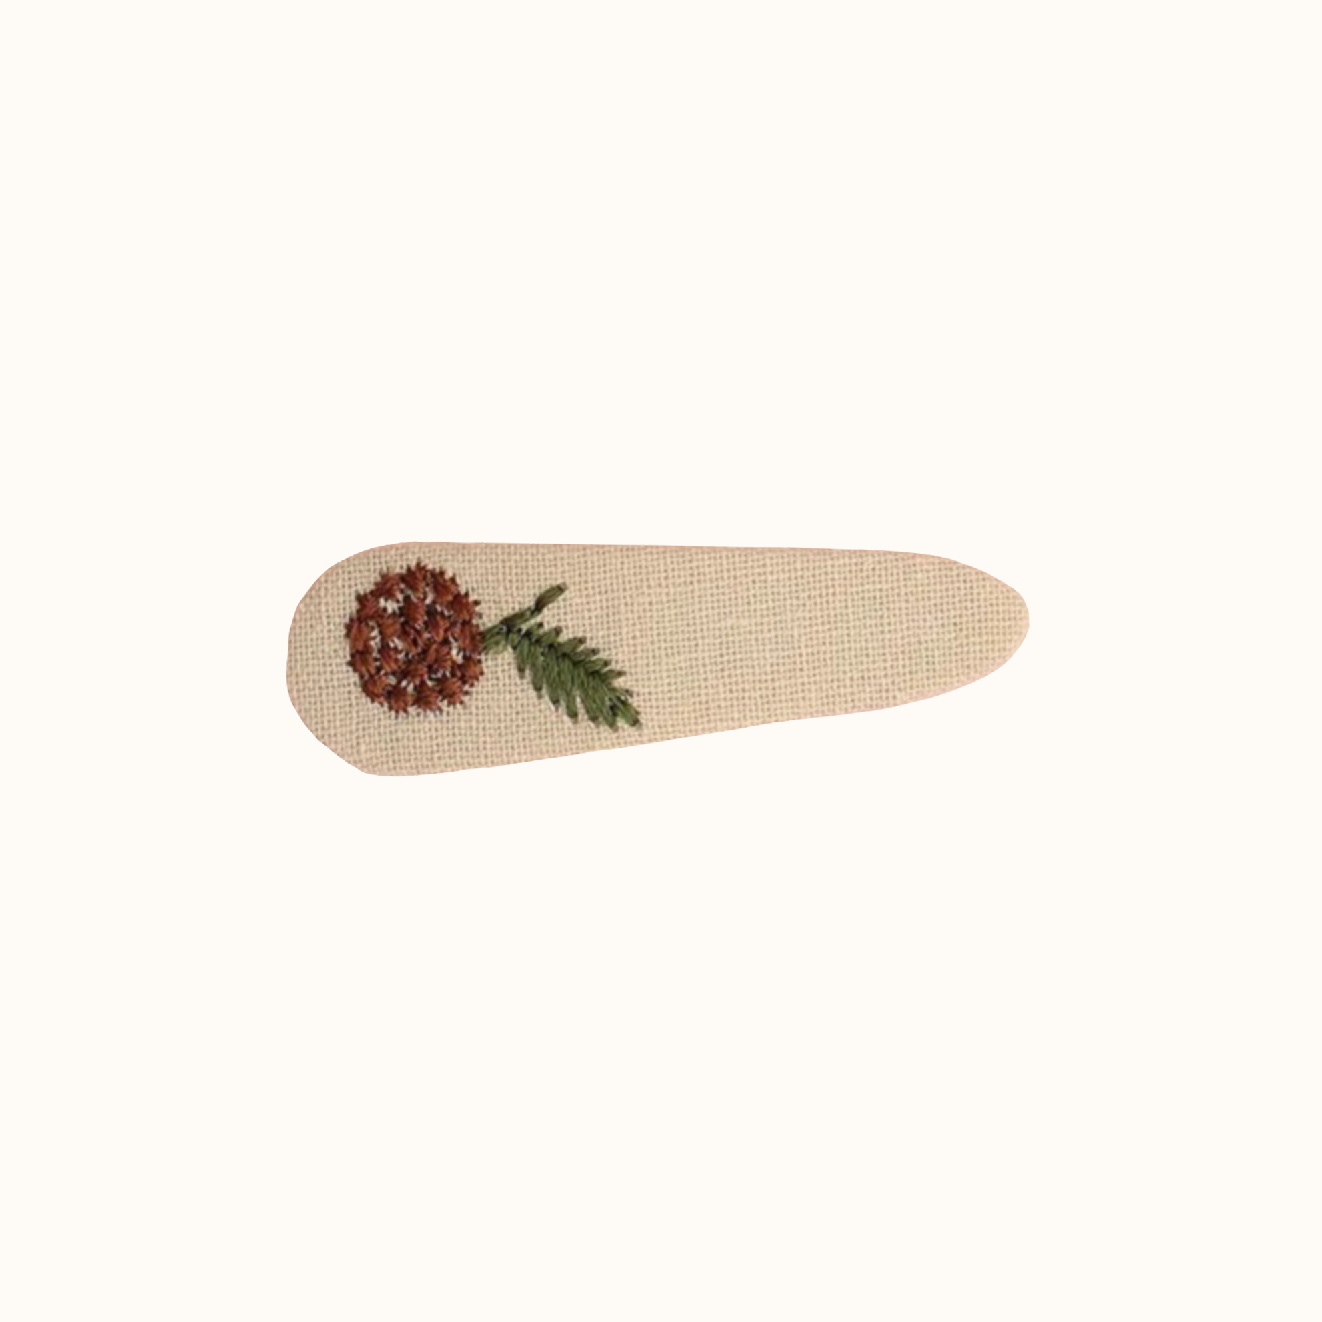 'Embroidered Flower' Hair Clip in Orange and Cream